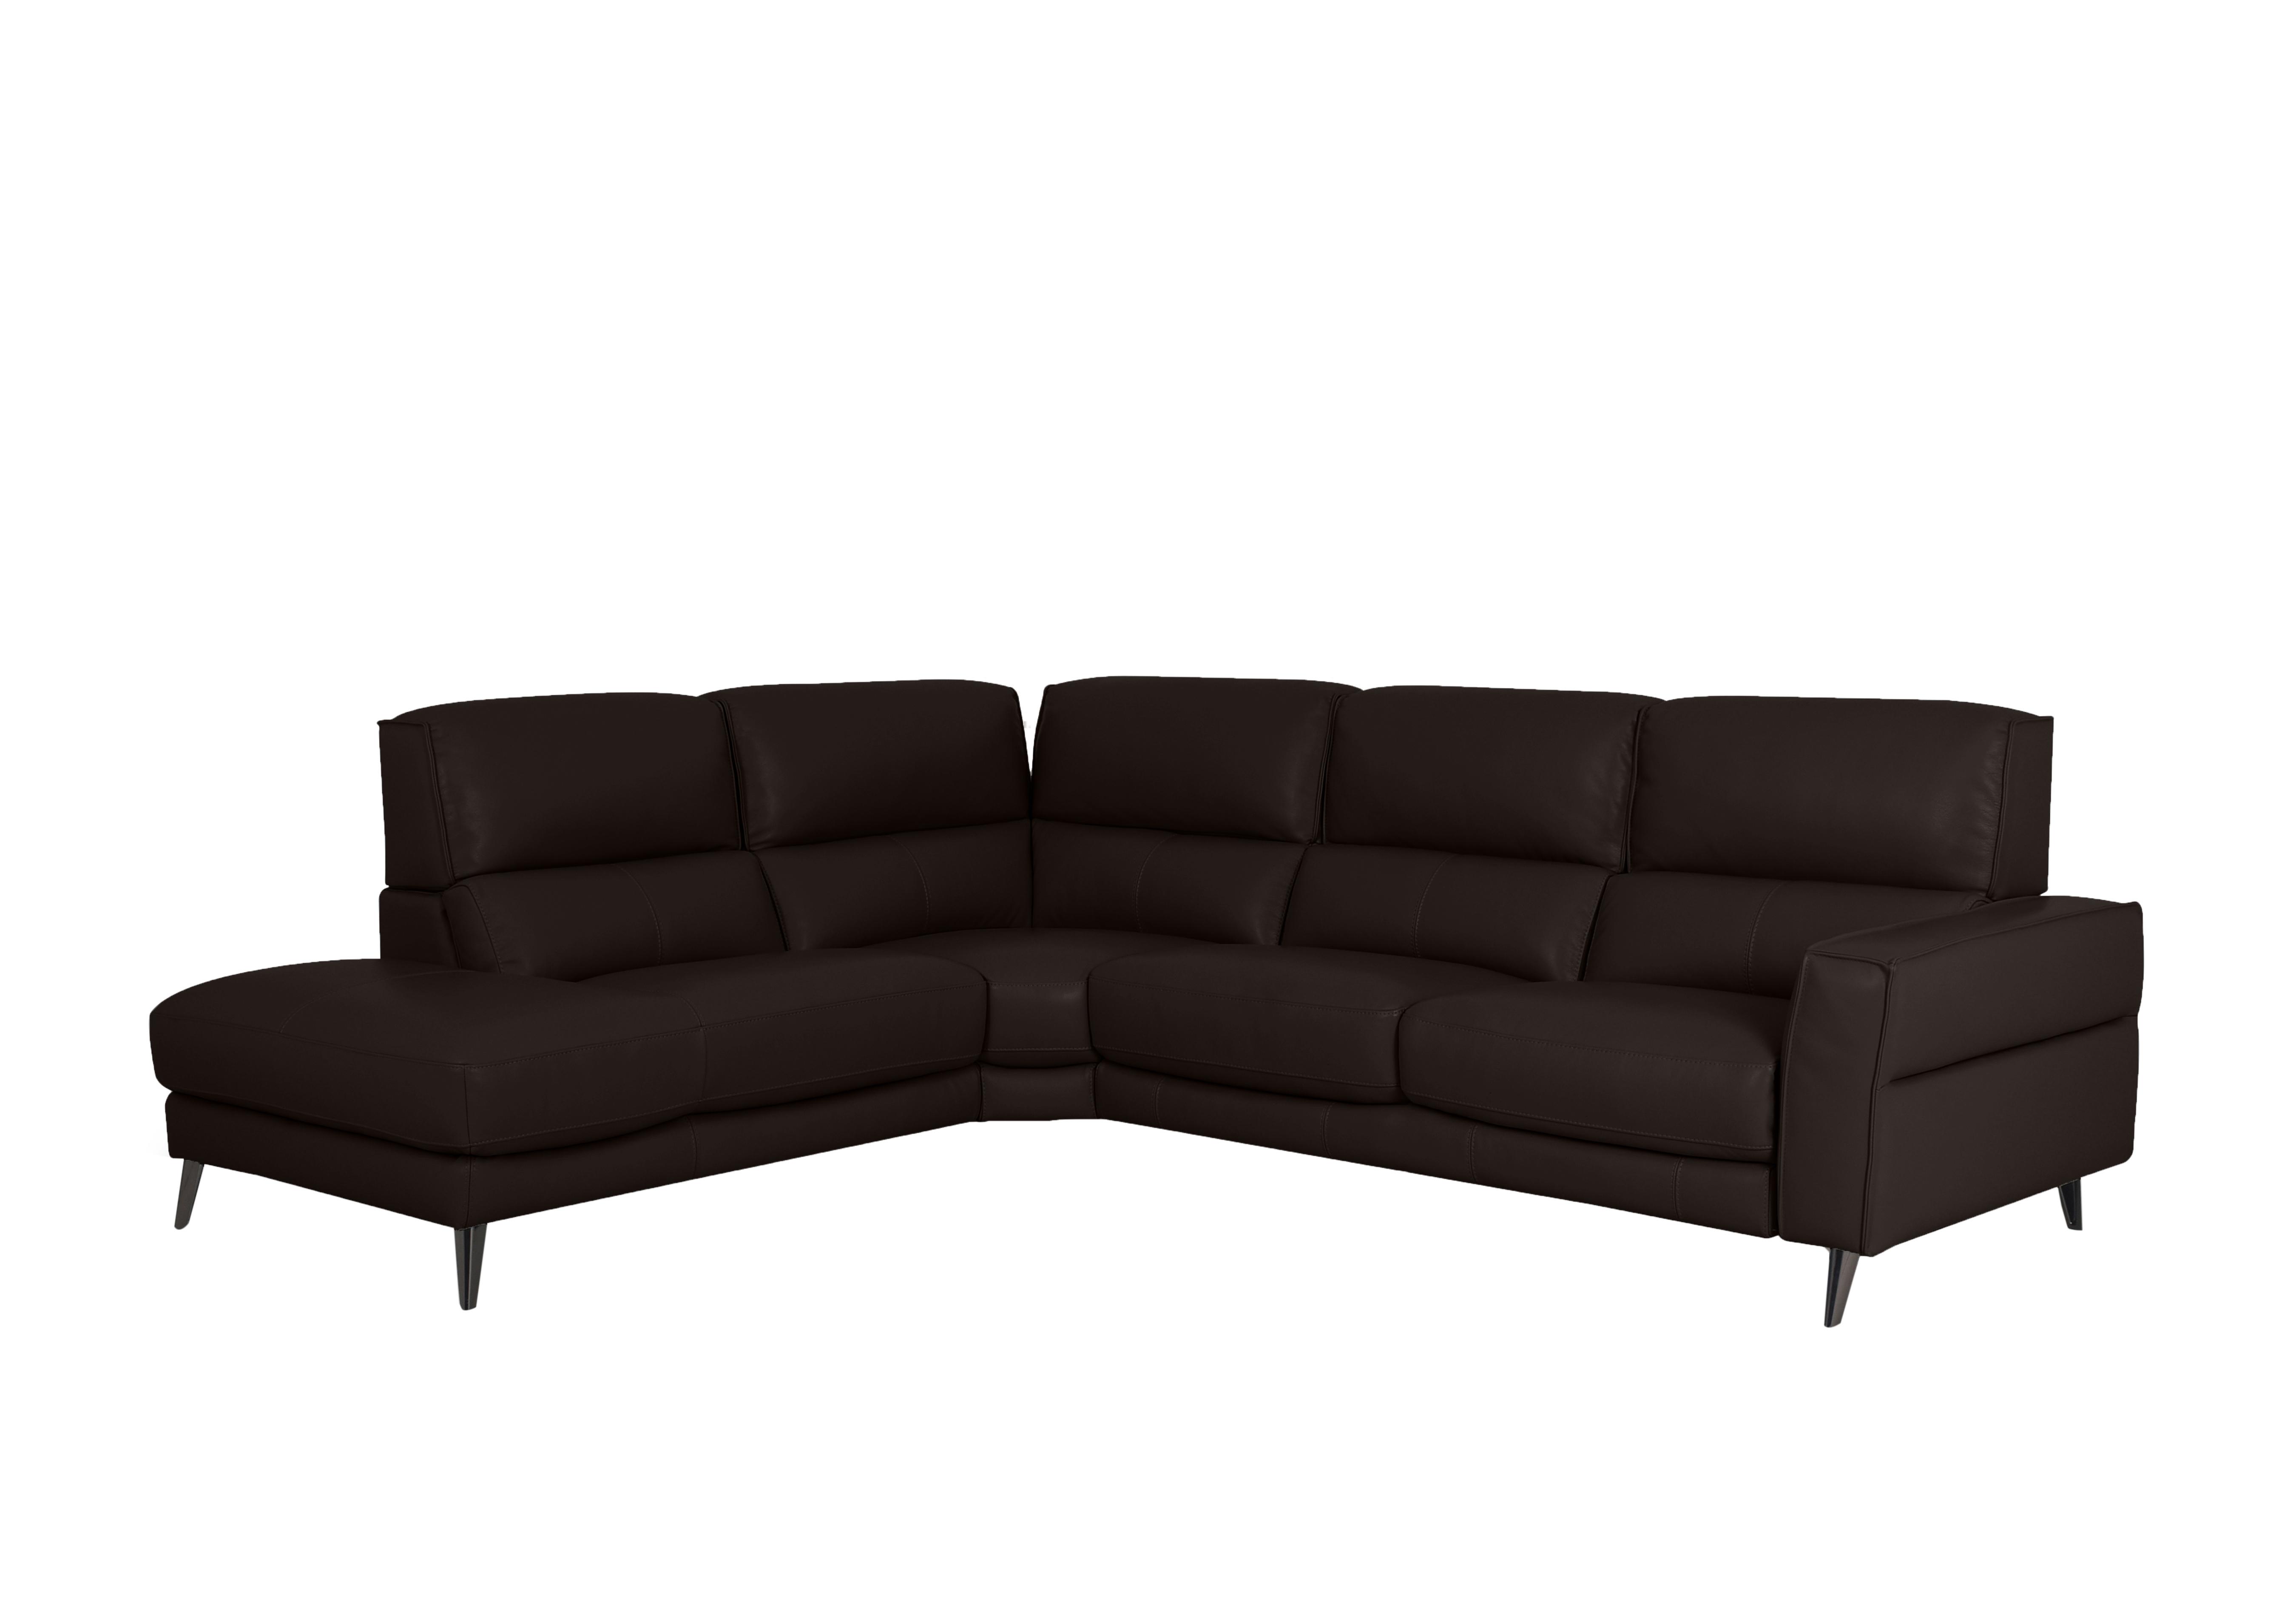 Axel Leather Chaise End Sofa in Bv-1748 Dark Chocolate on Furniture Village